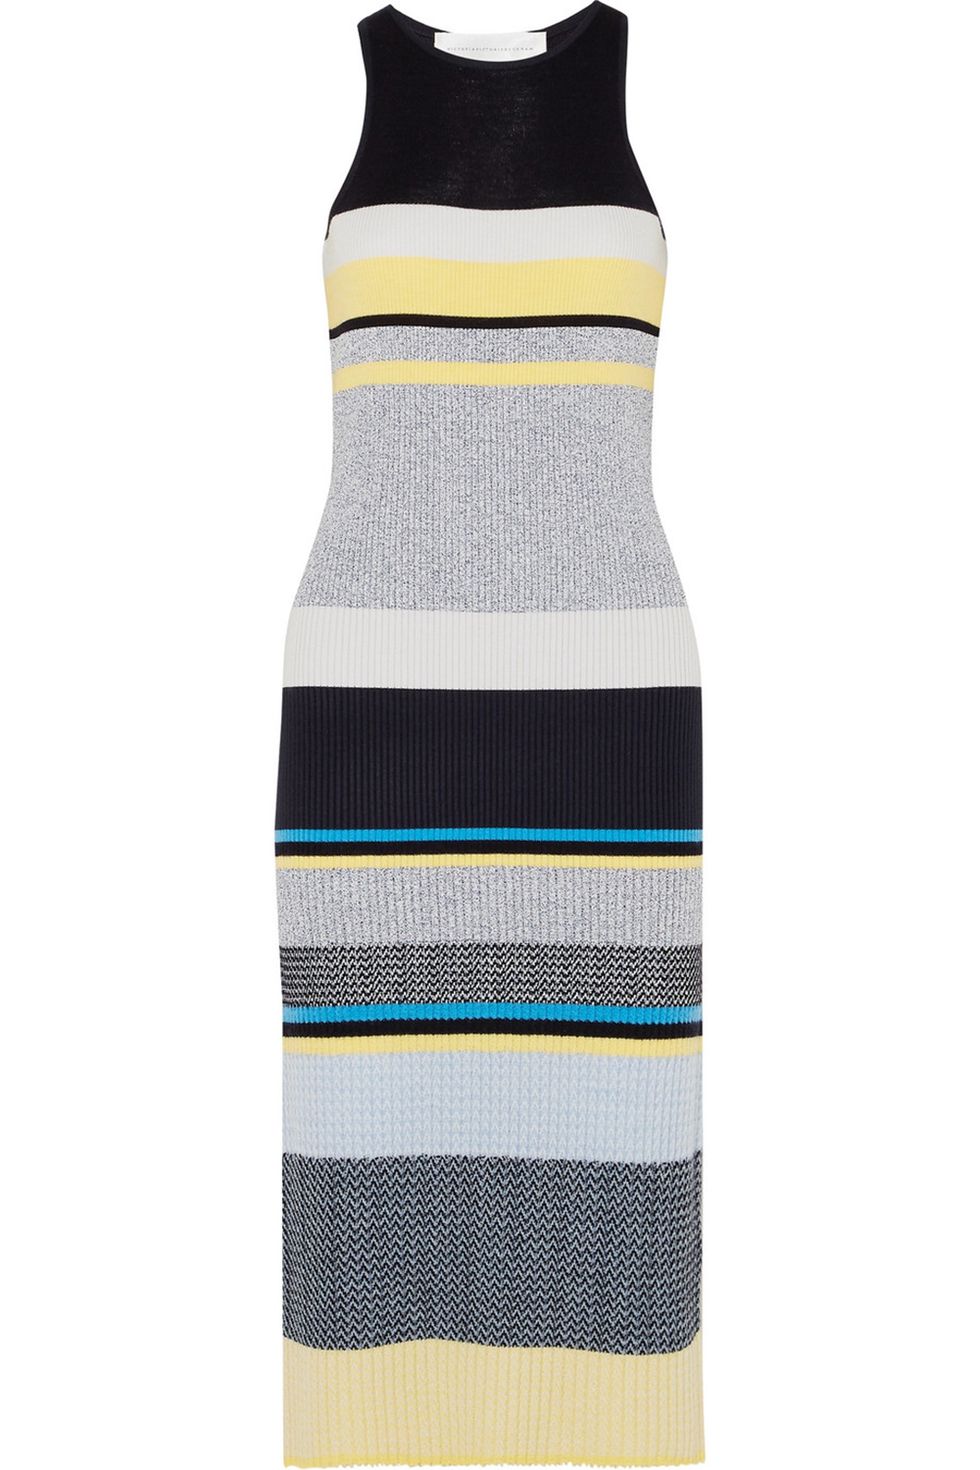 Clothing, Dress, Yellow, Turquoise, Cocktail dress, Day dress, Neck, Beige, Bottle, Strapless dress, 